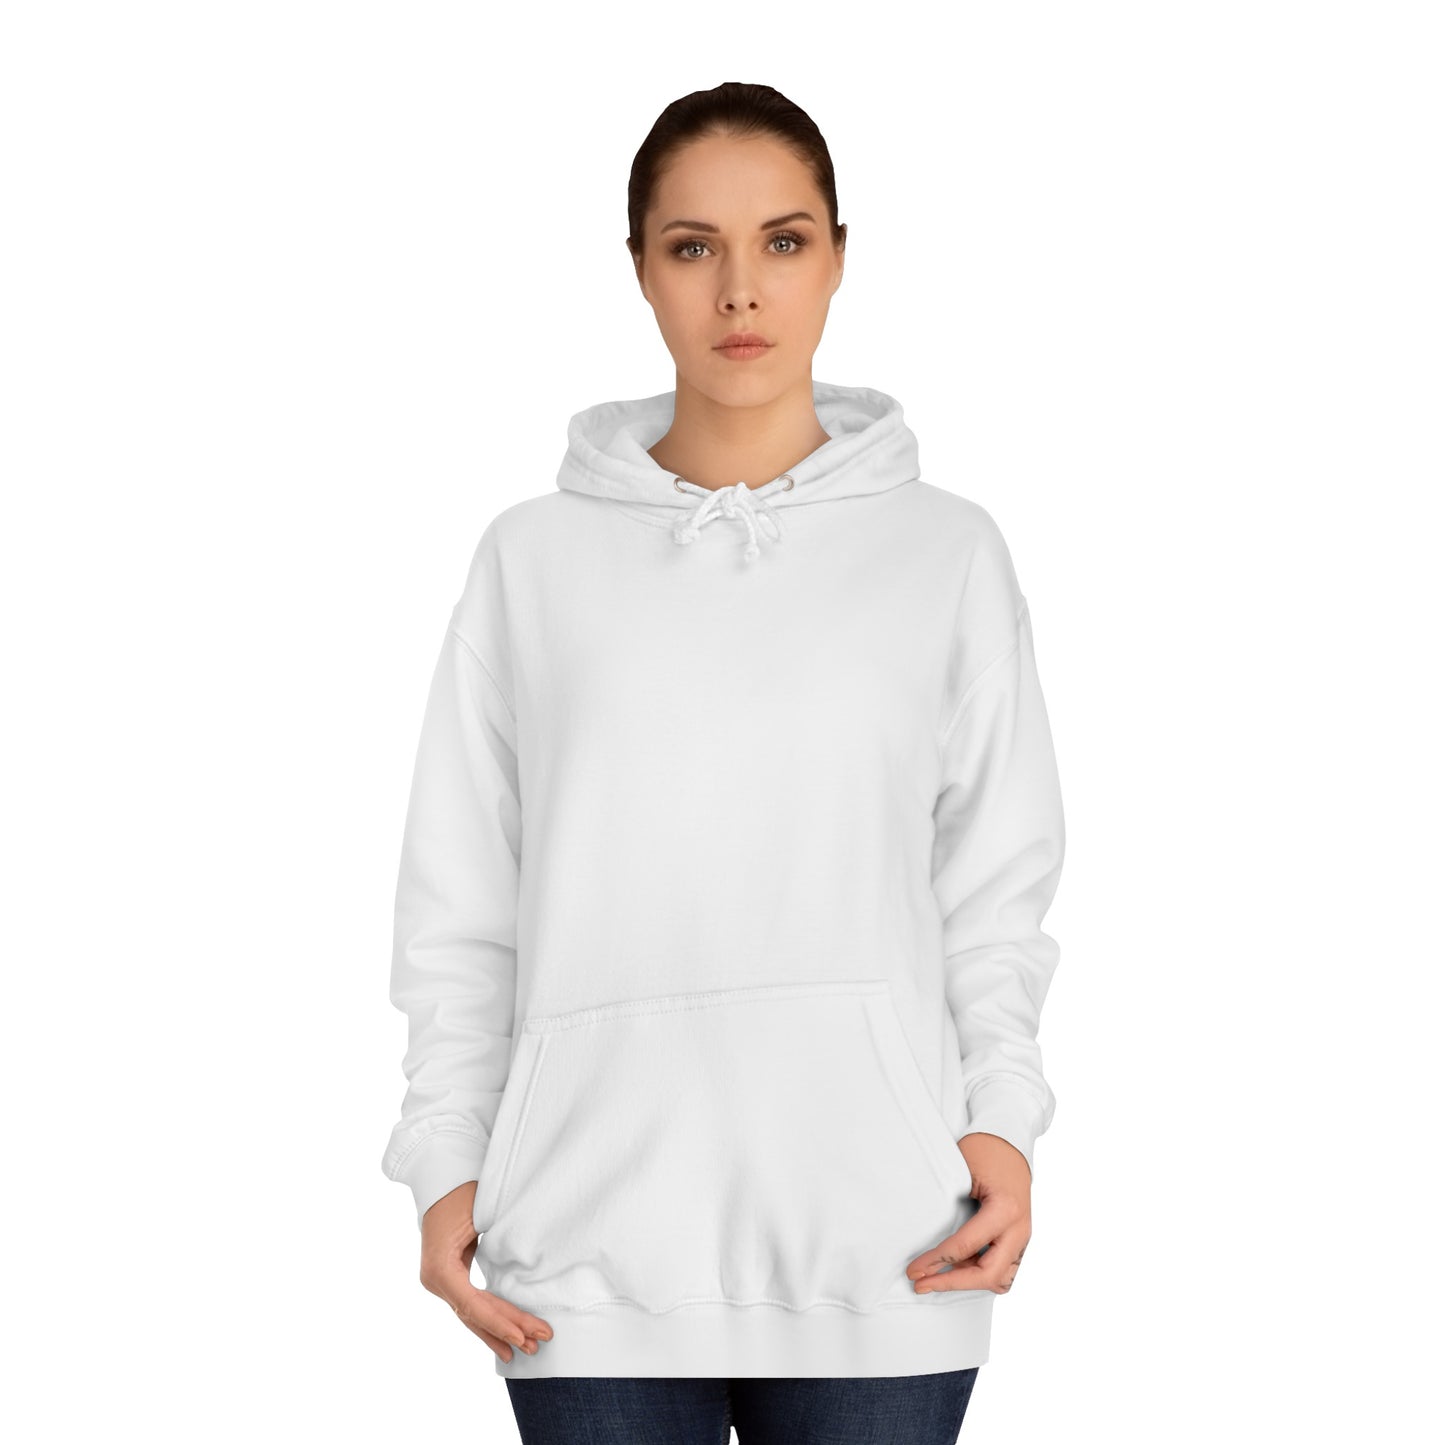 Live, Laugh, Leave Me Be - hoodie x Sarah Words Collection